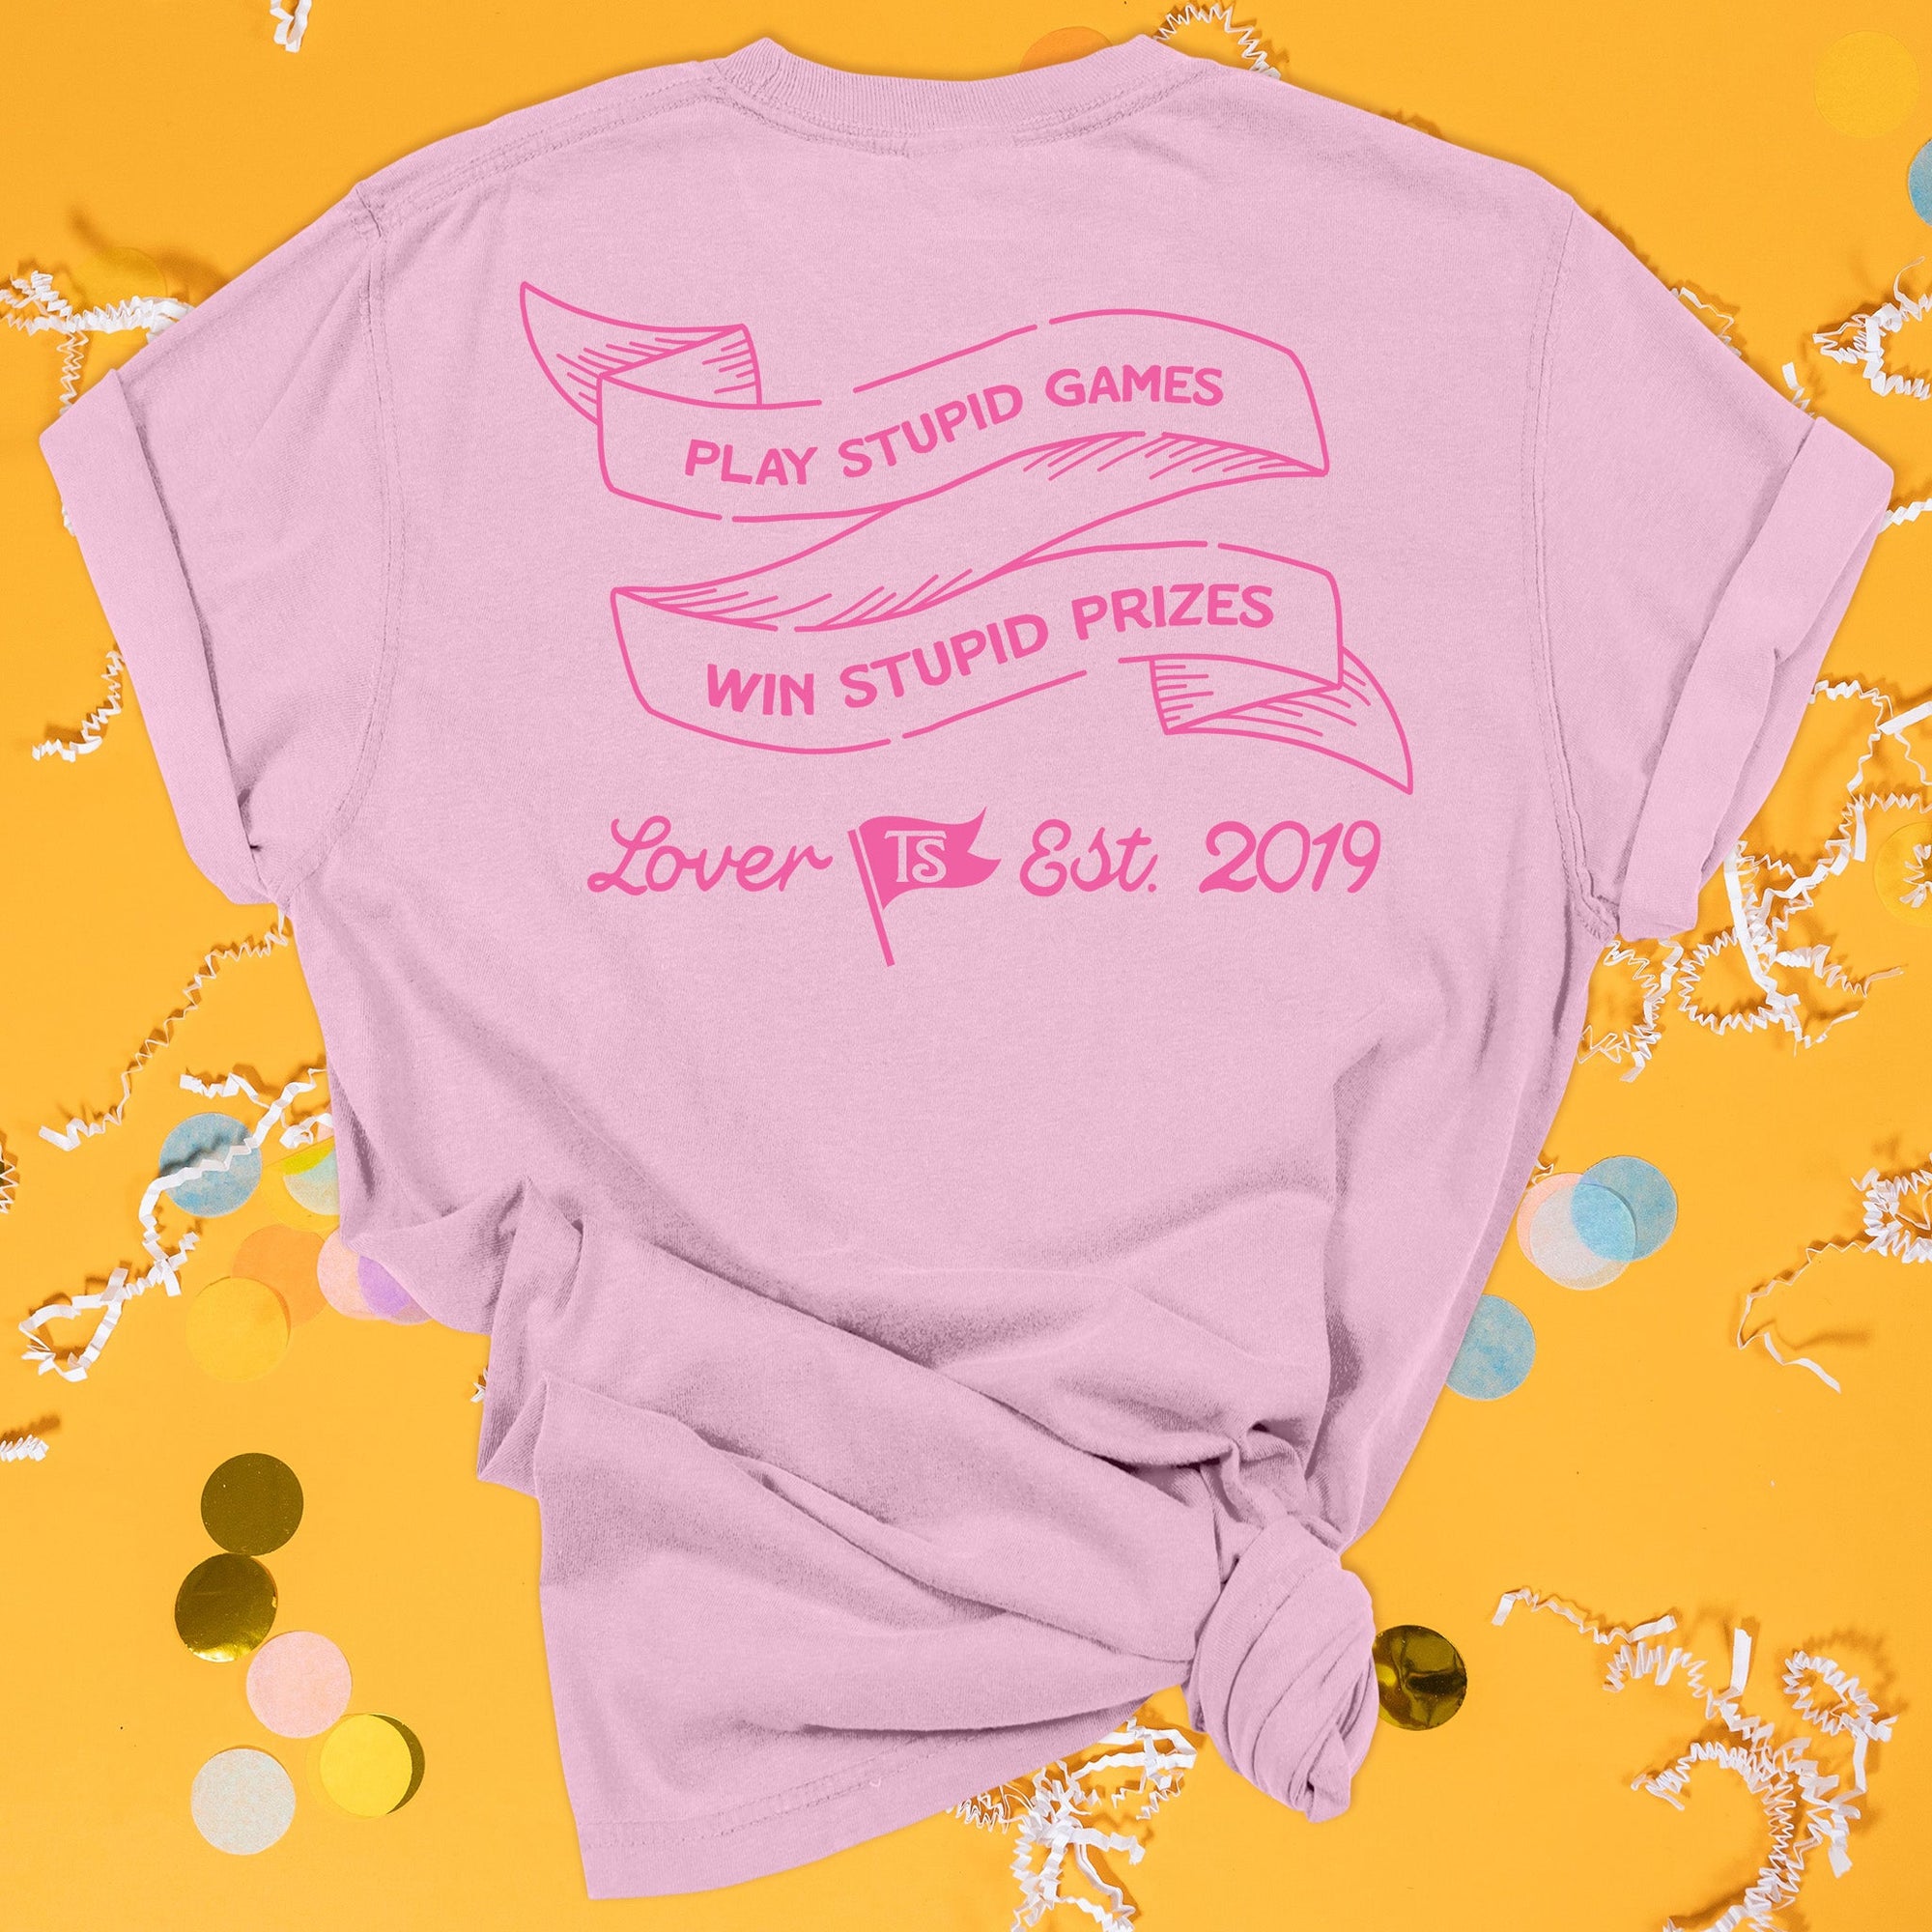 On a sunny mustard background sits the back of a t-shirt with white crinkle and big, colorful confetti scattered around. This Taylor Swift Inspired Reputation tee is pink with bubblegum lettering and ribbon illustration. In the ribbon it says "PLAY STUPID GAMES WIN STUPID PRIZES" in all caps. Under it says "Lover Est. 2019" in script lettering. There is a flag that has "TS" in it. 